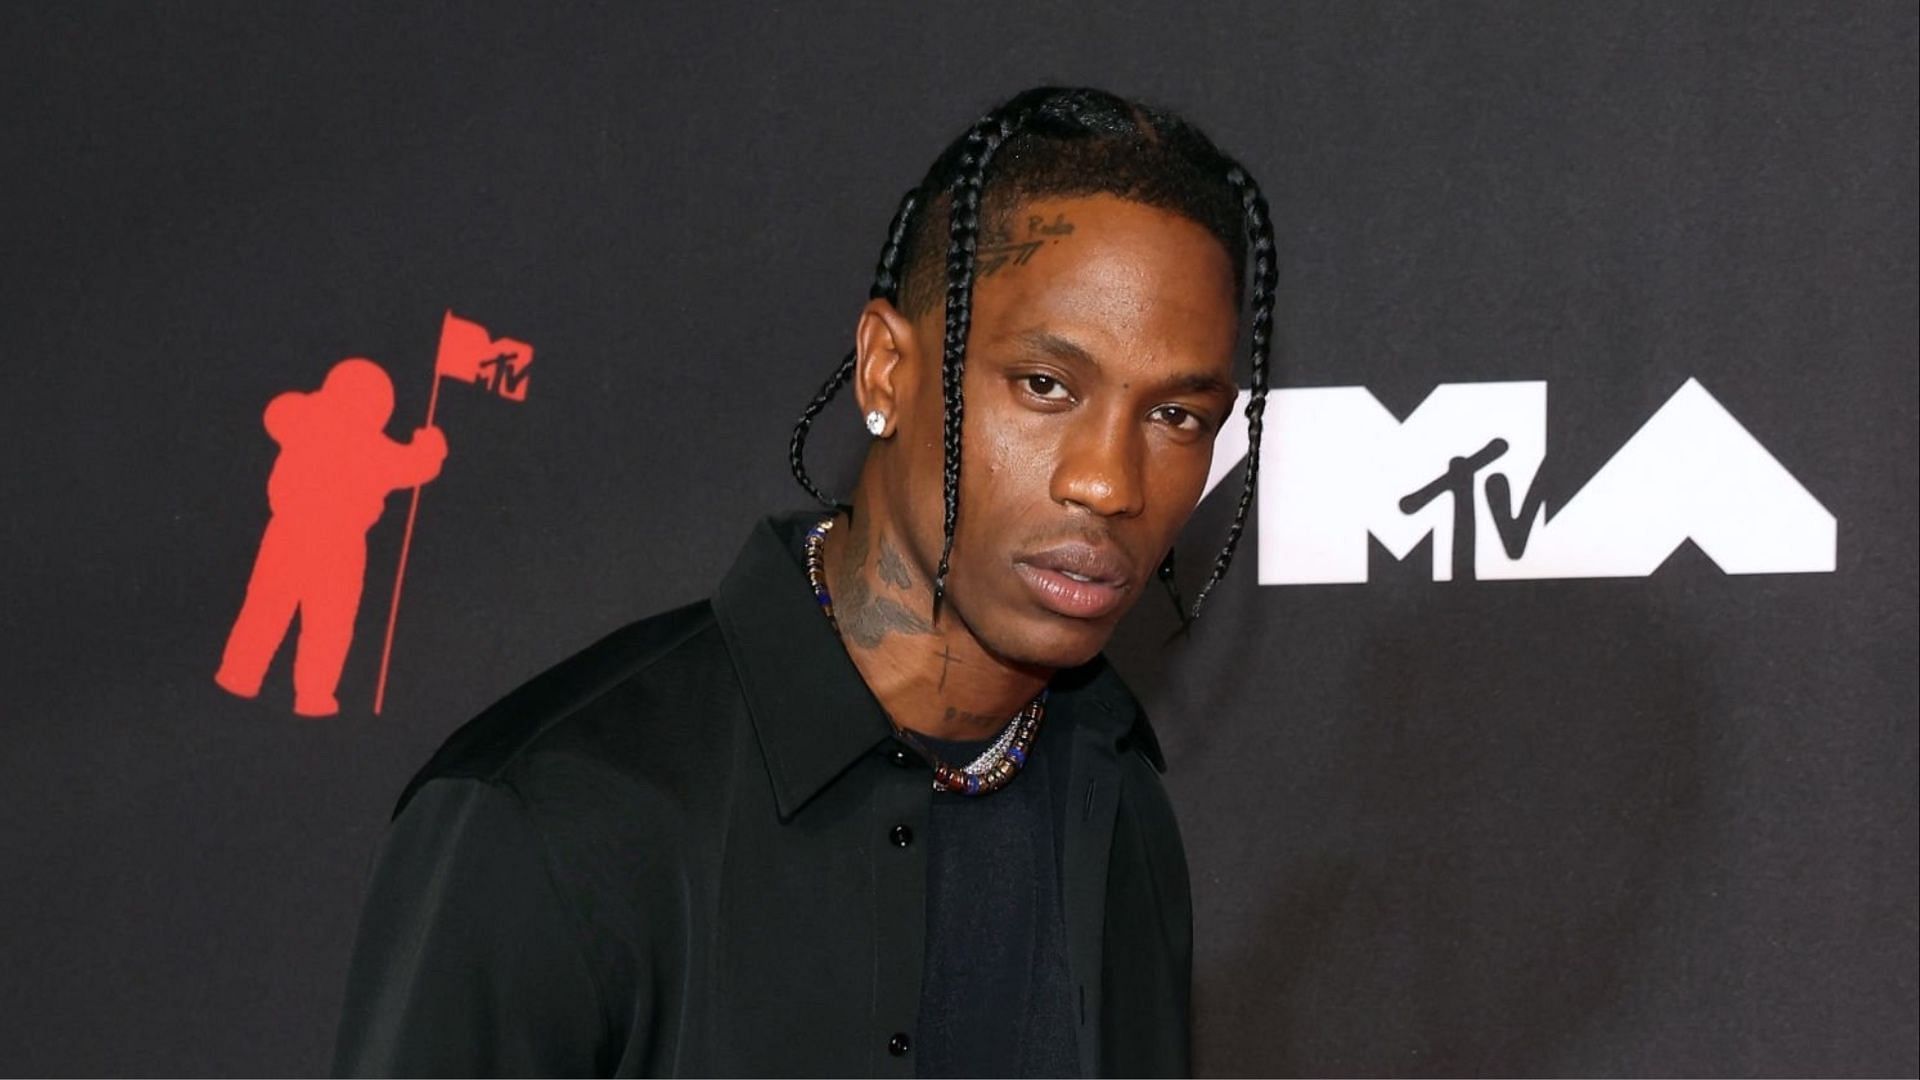 Houston PD releases report on Travis Scott Astroworld disaster